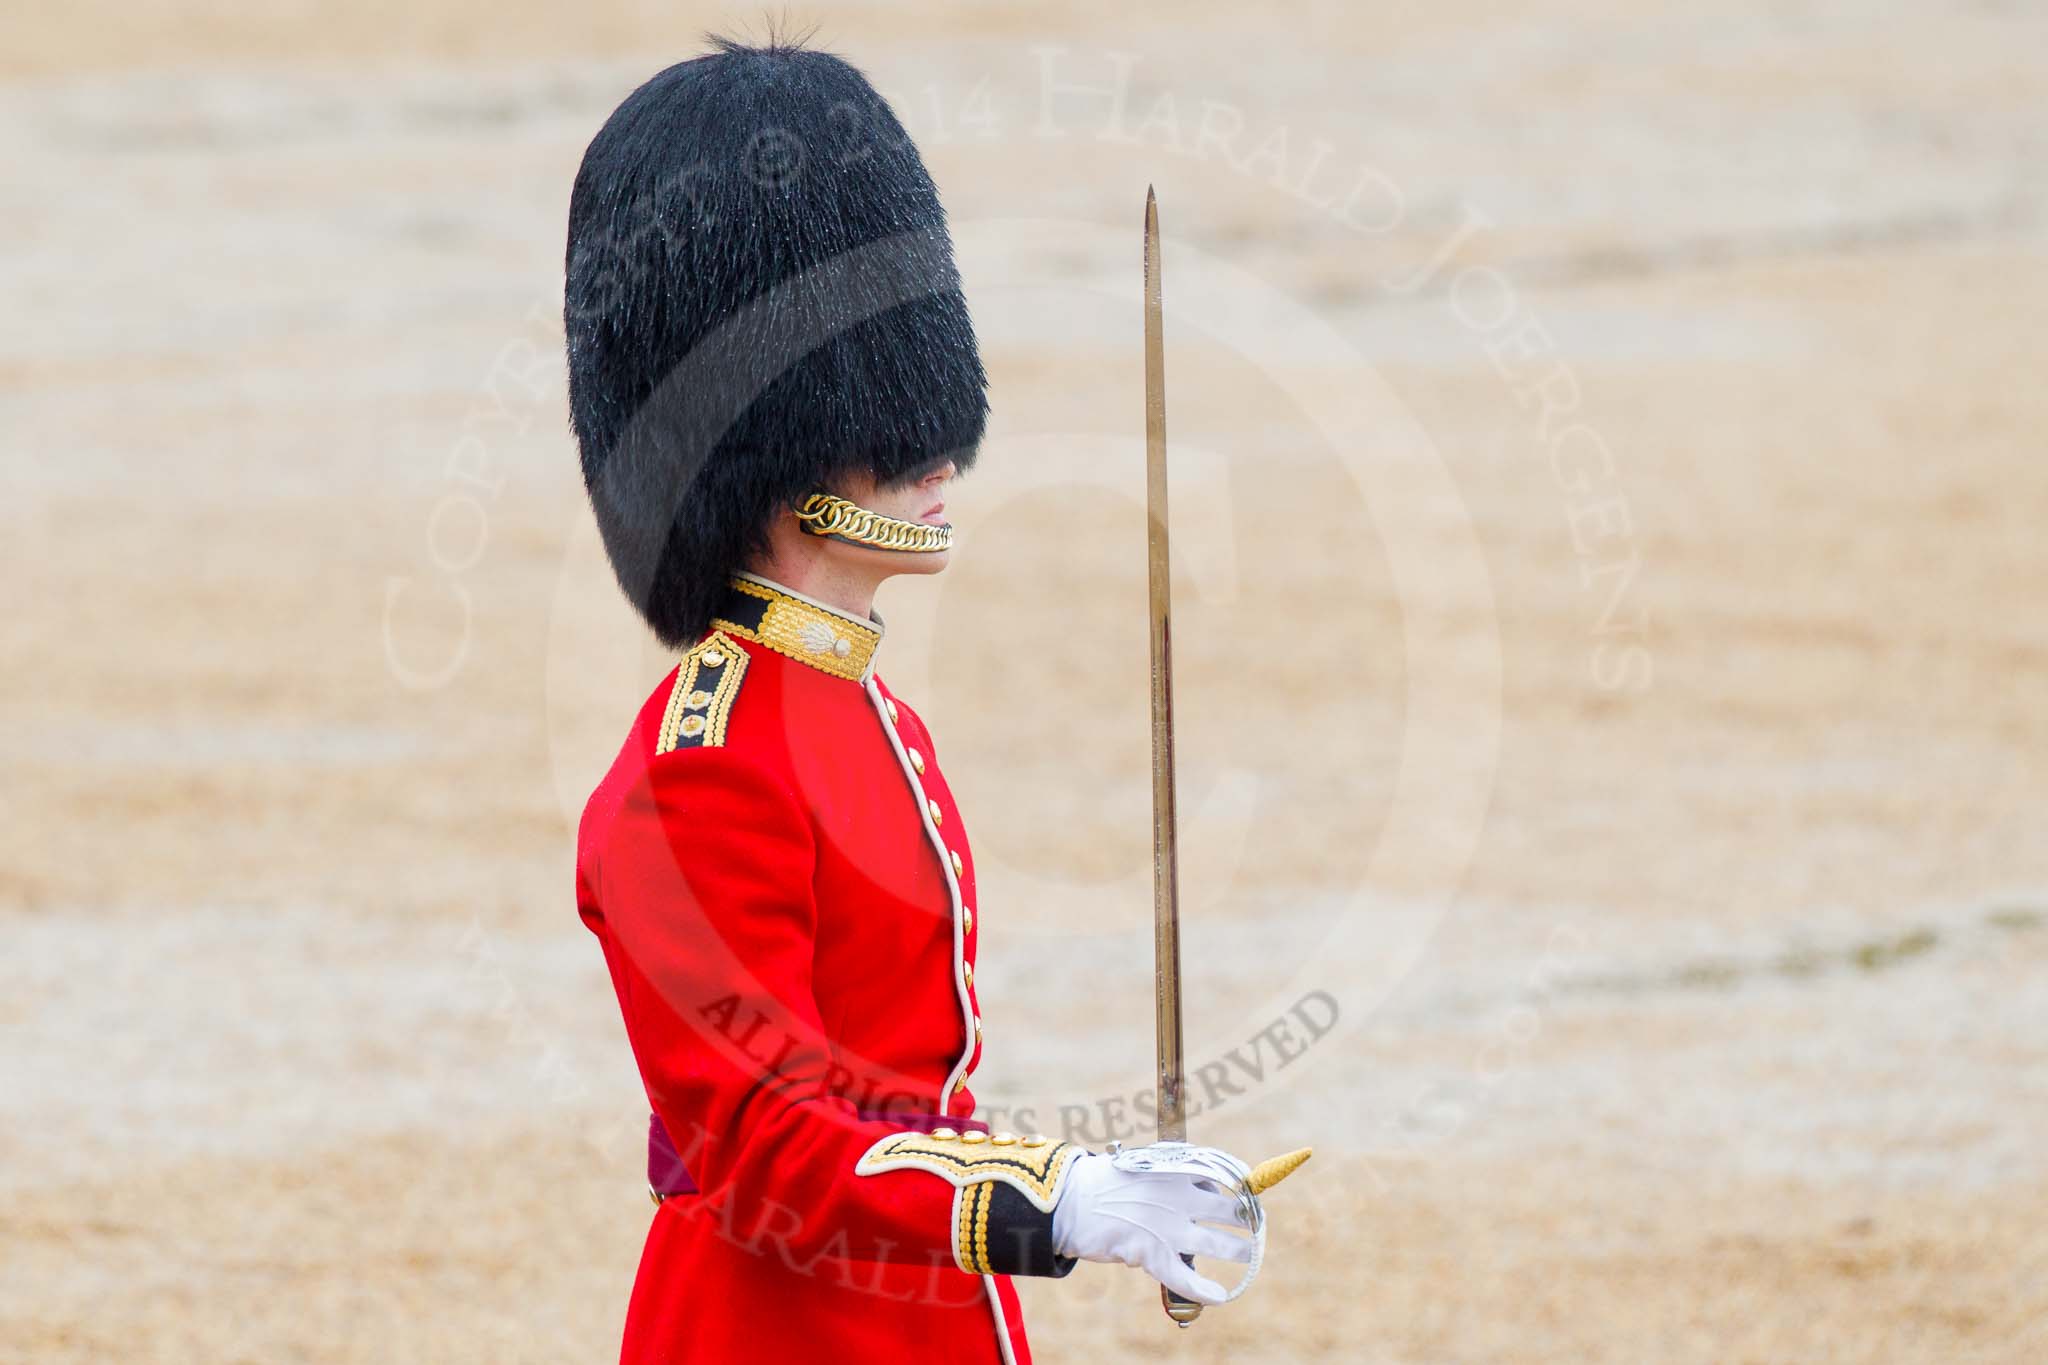 The Colonel's Review 2014.
Horse Guards Parade, Westminster,
London,

United Kingdom,
on 07 June 2014 at 11:35, image #503